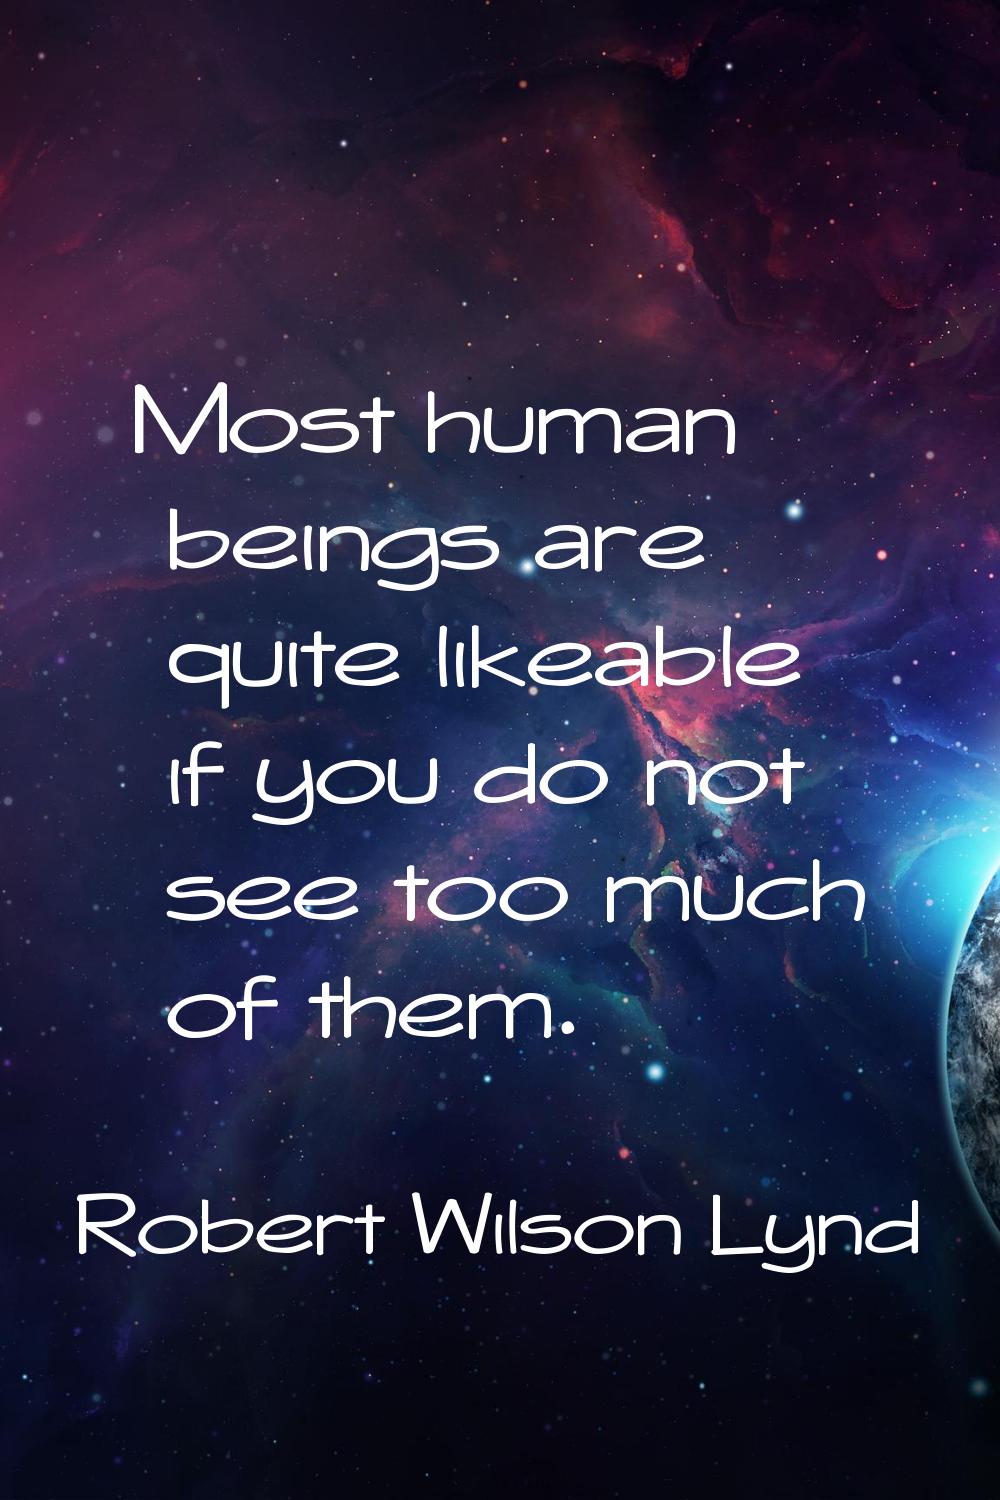 Most human beings are quite likeable if you do not see too much of them.